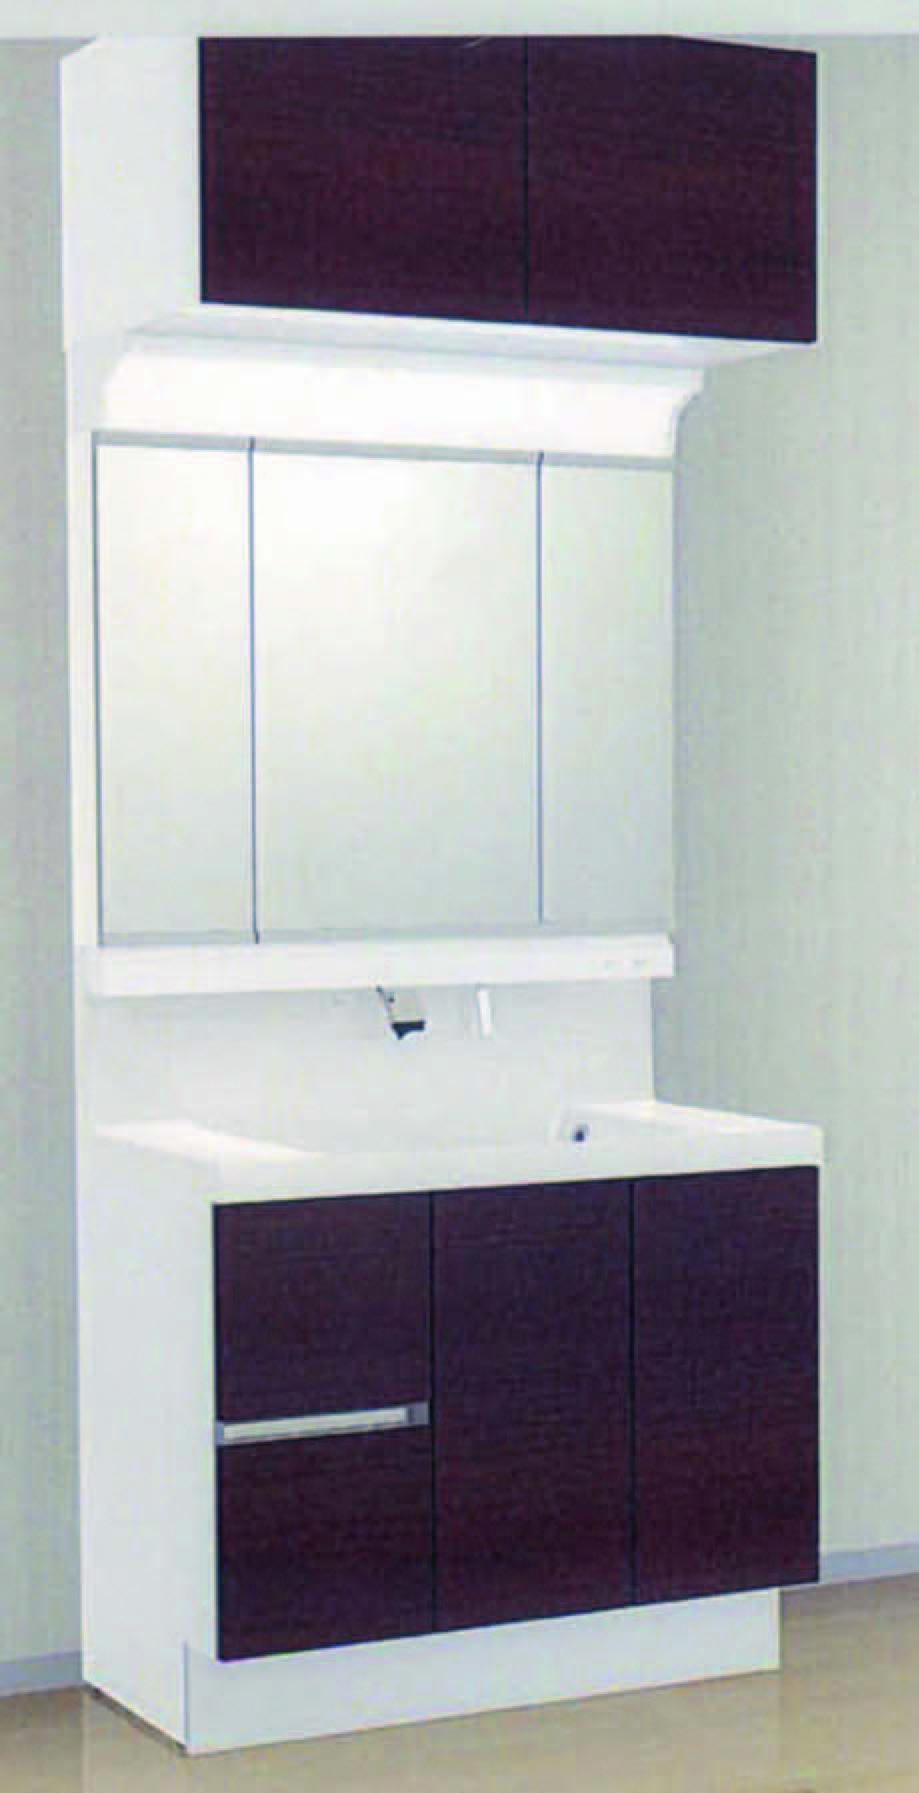 Wash basin, toilet.  [Bathroom vanity] Basin counter to create a comfortable basin space in a variety of planning.